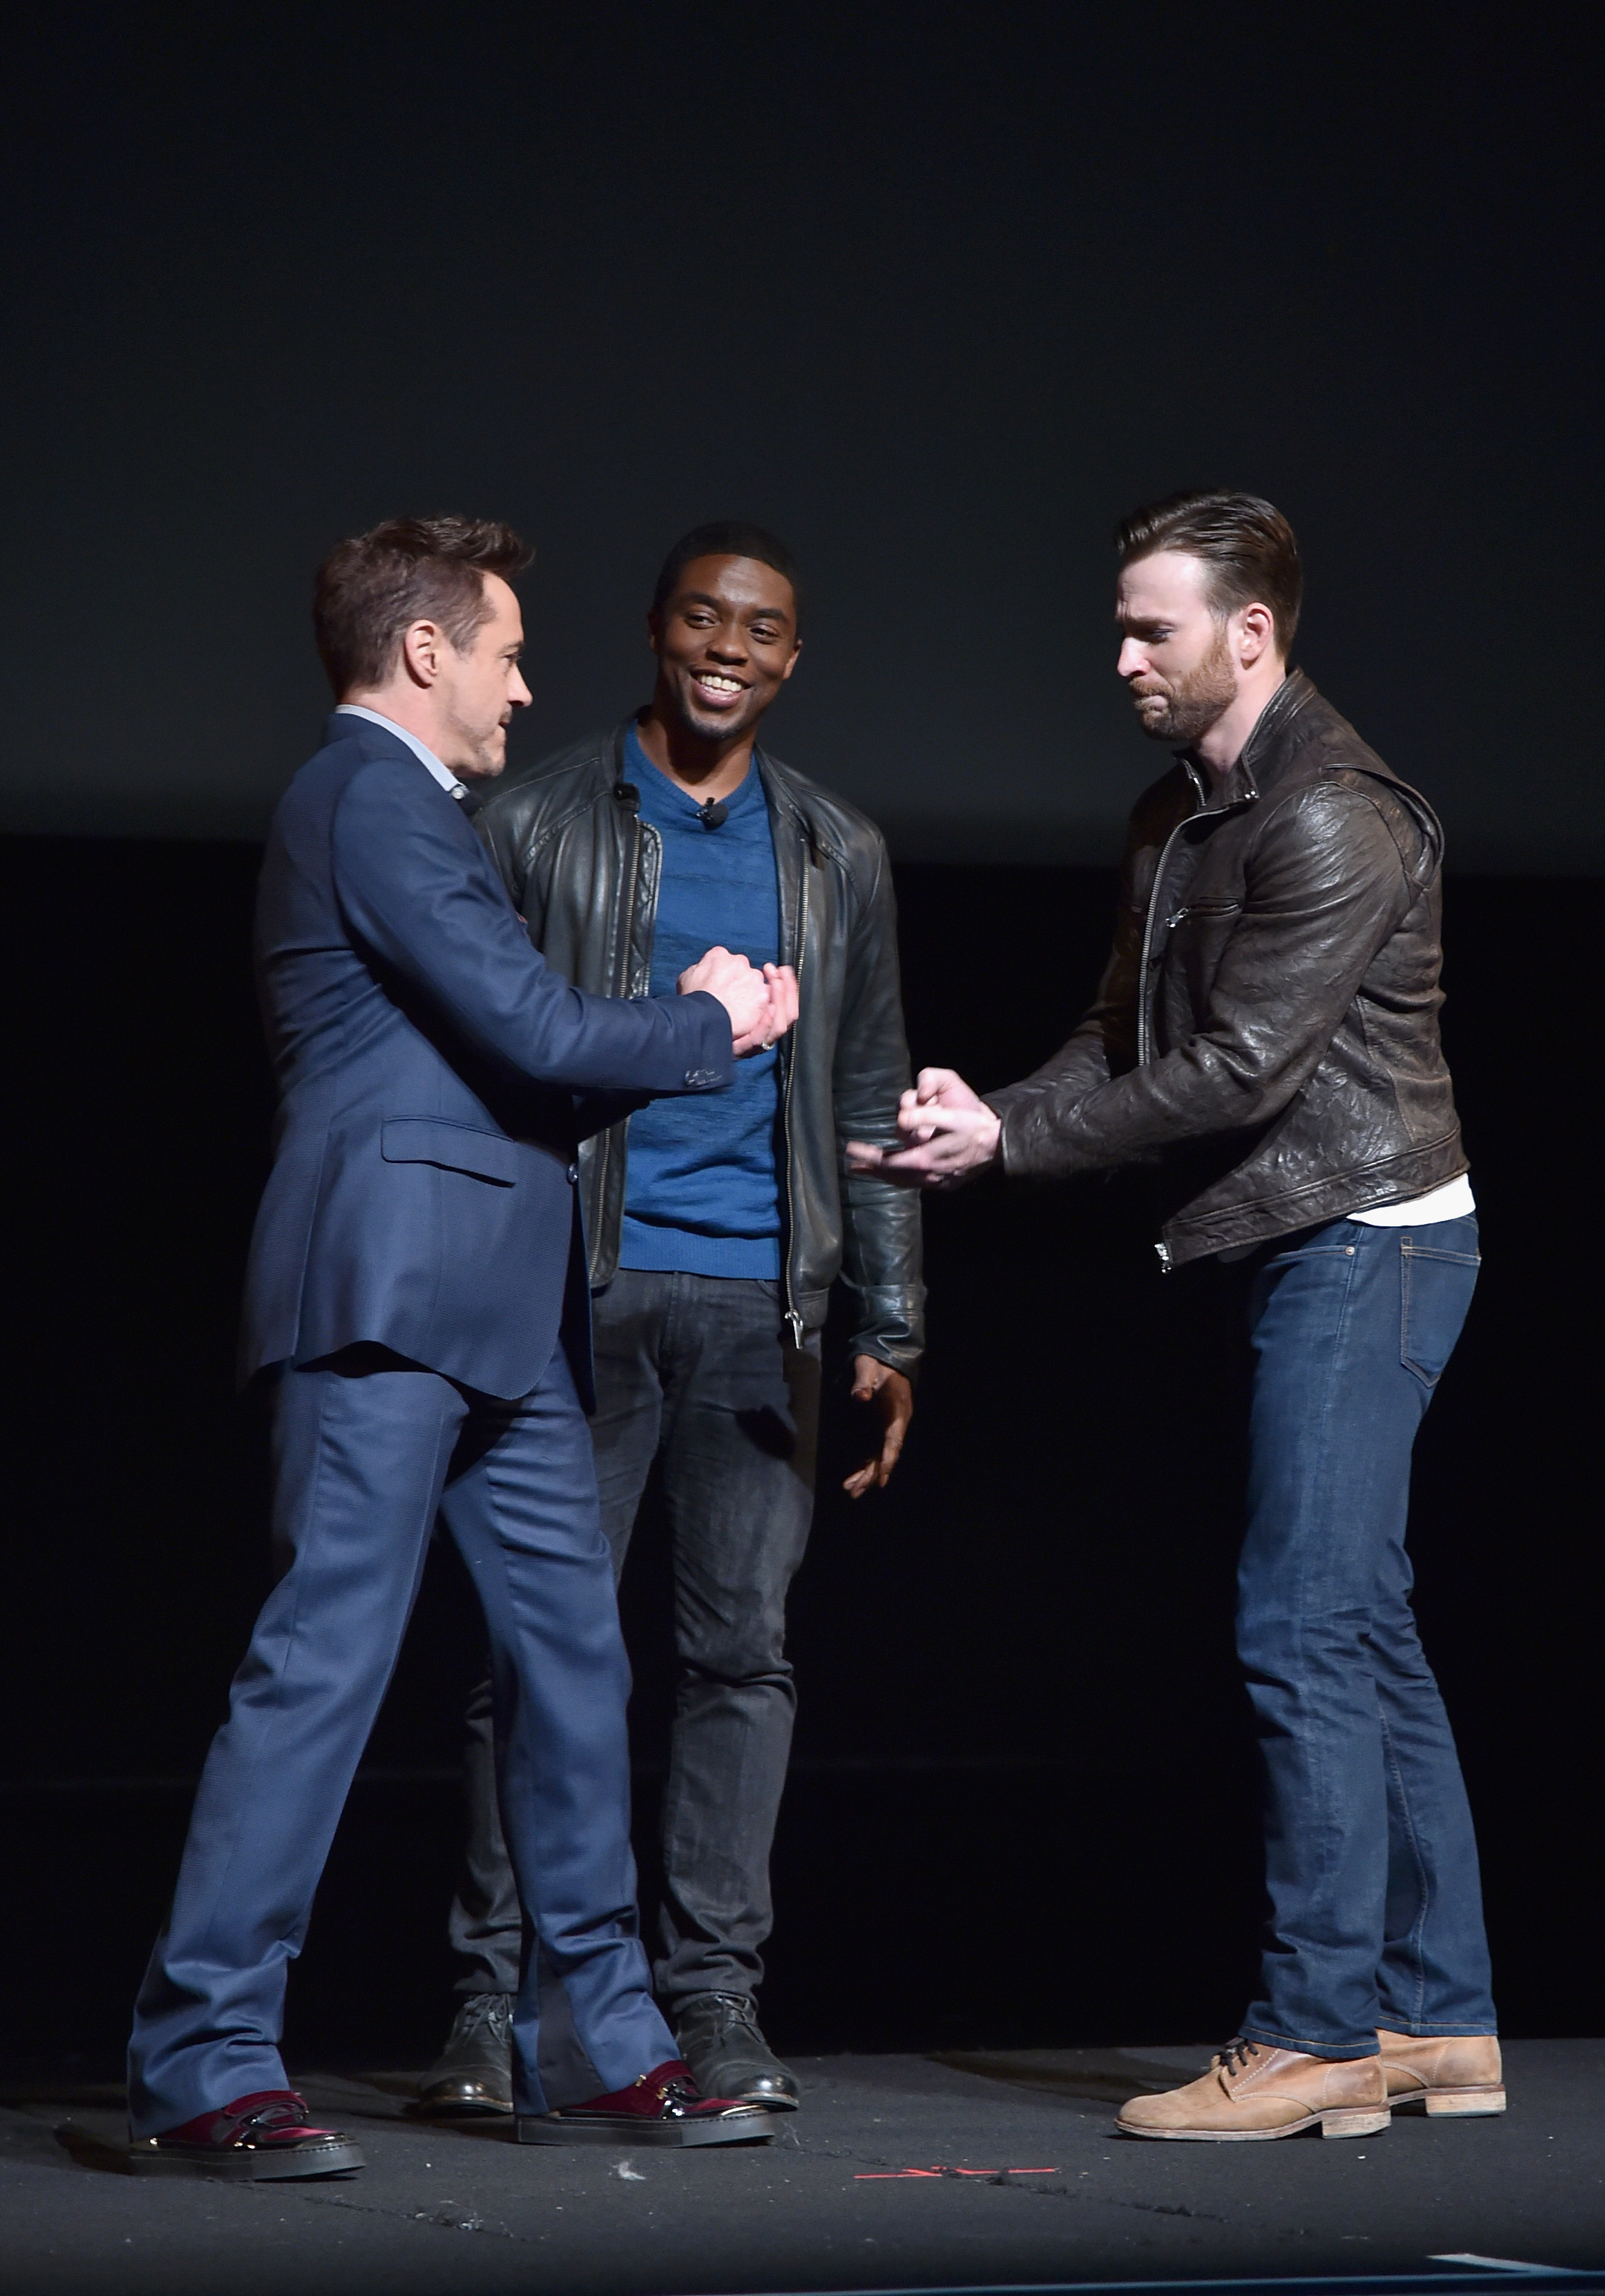 Marvel Event Image Featuring Robert Downey Jr., Chris Evans, and Chadwick Boseman